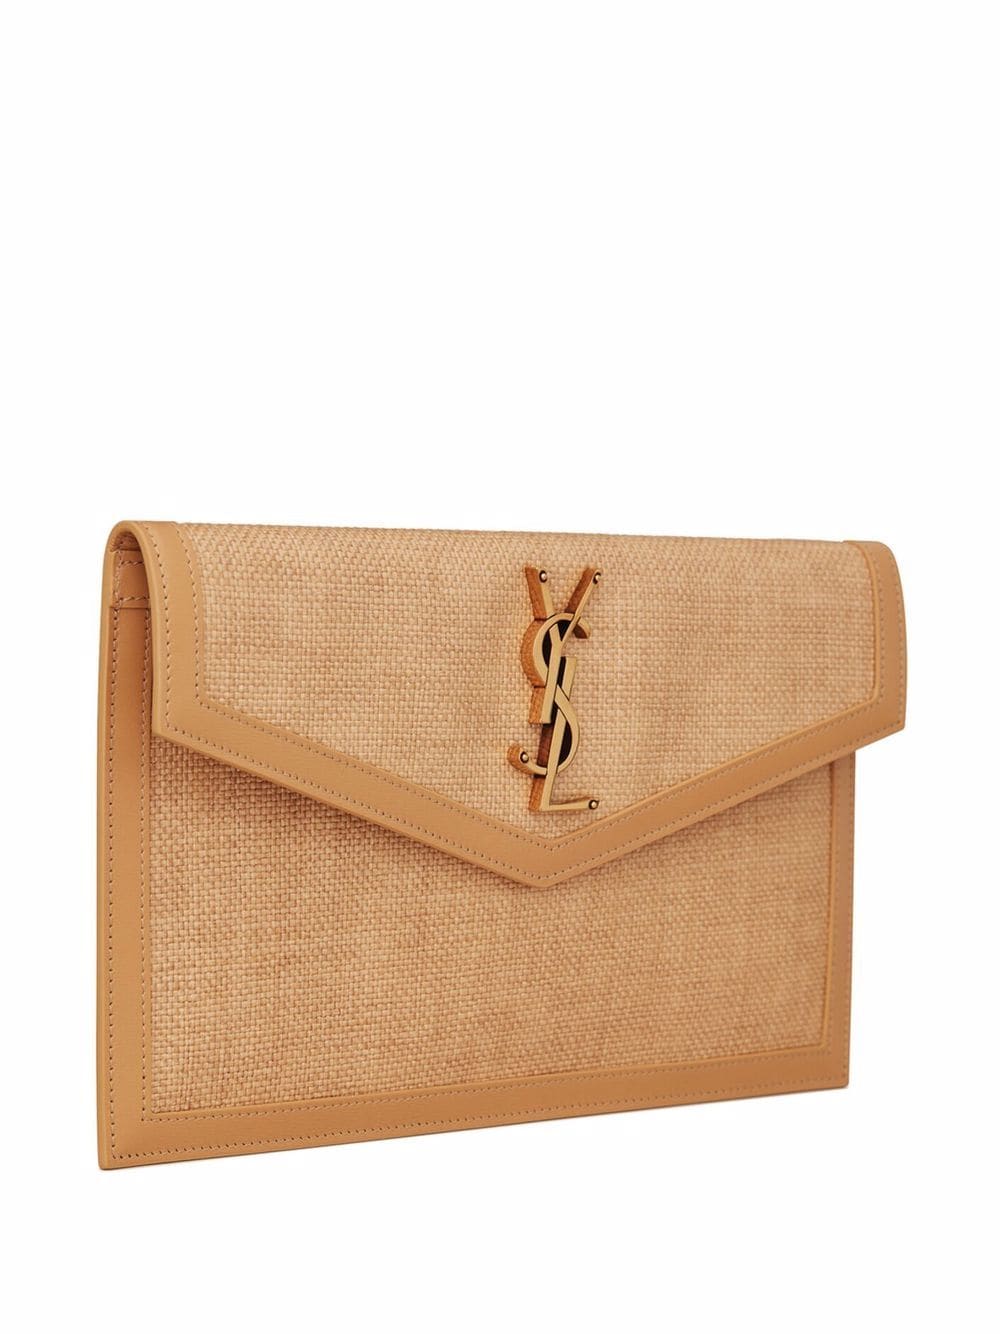 Buy Ysl Uptown Pouch Insert Online In India -  India